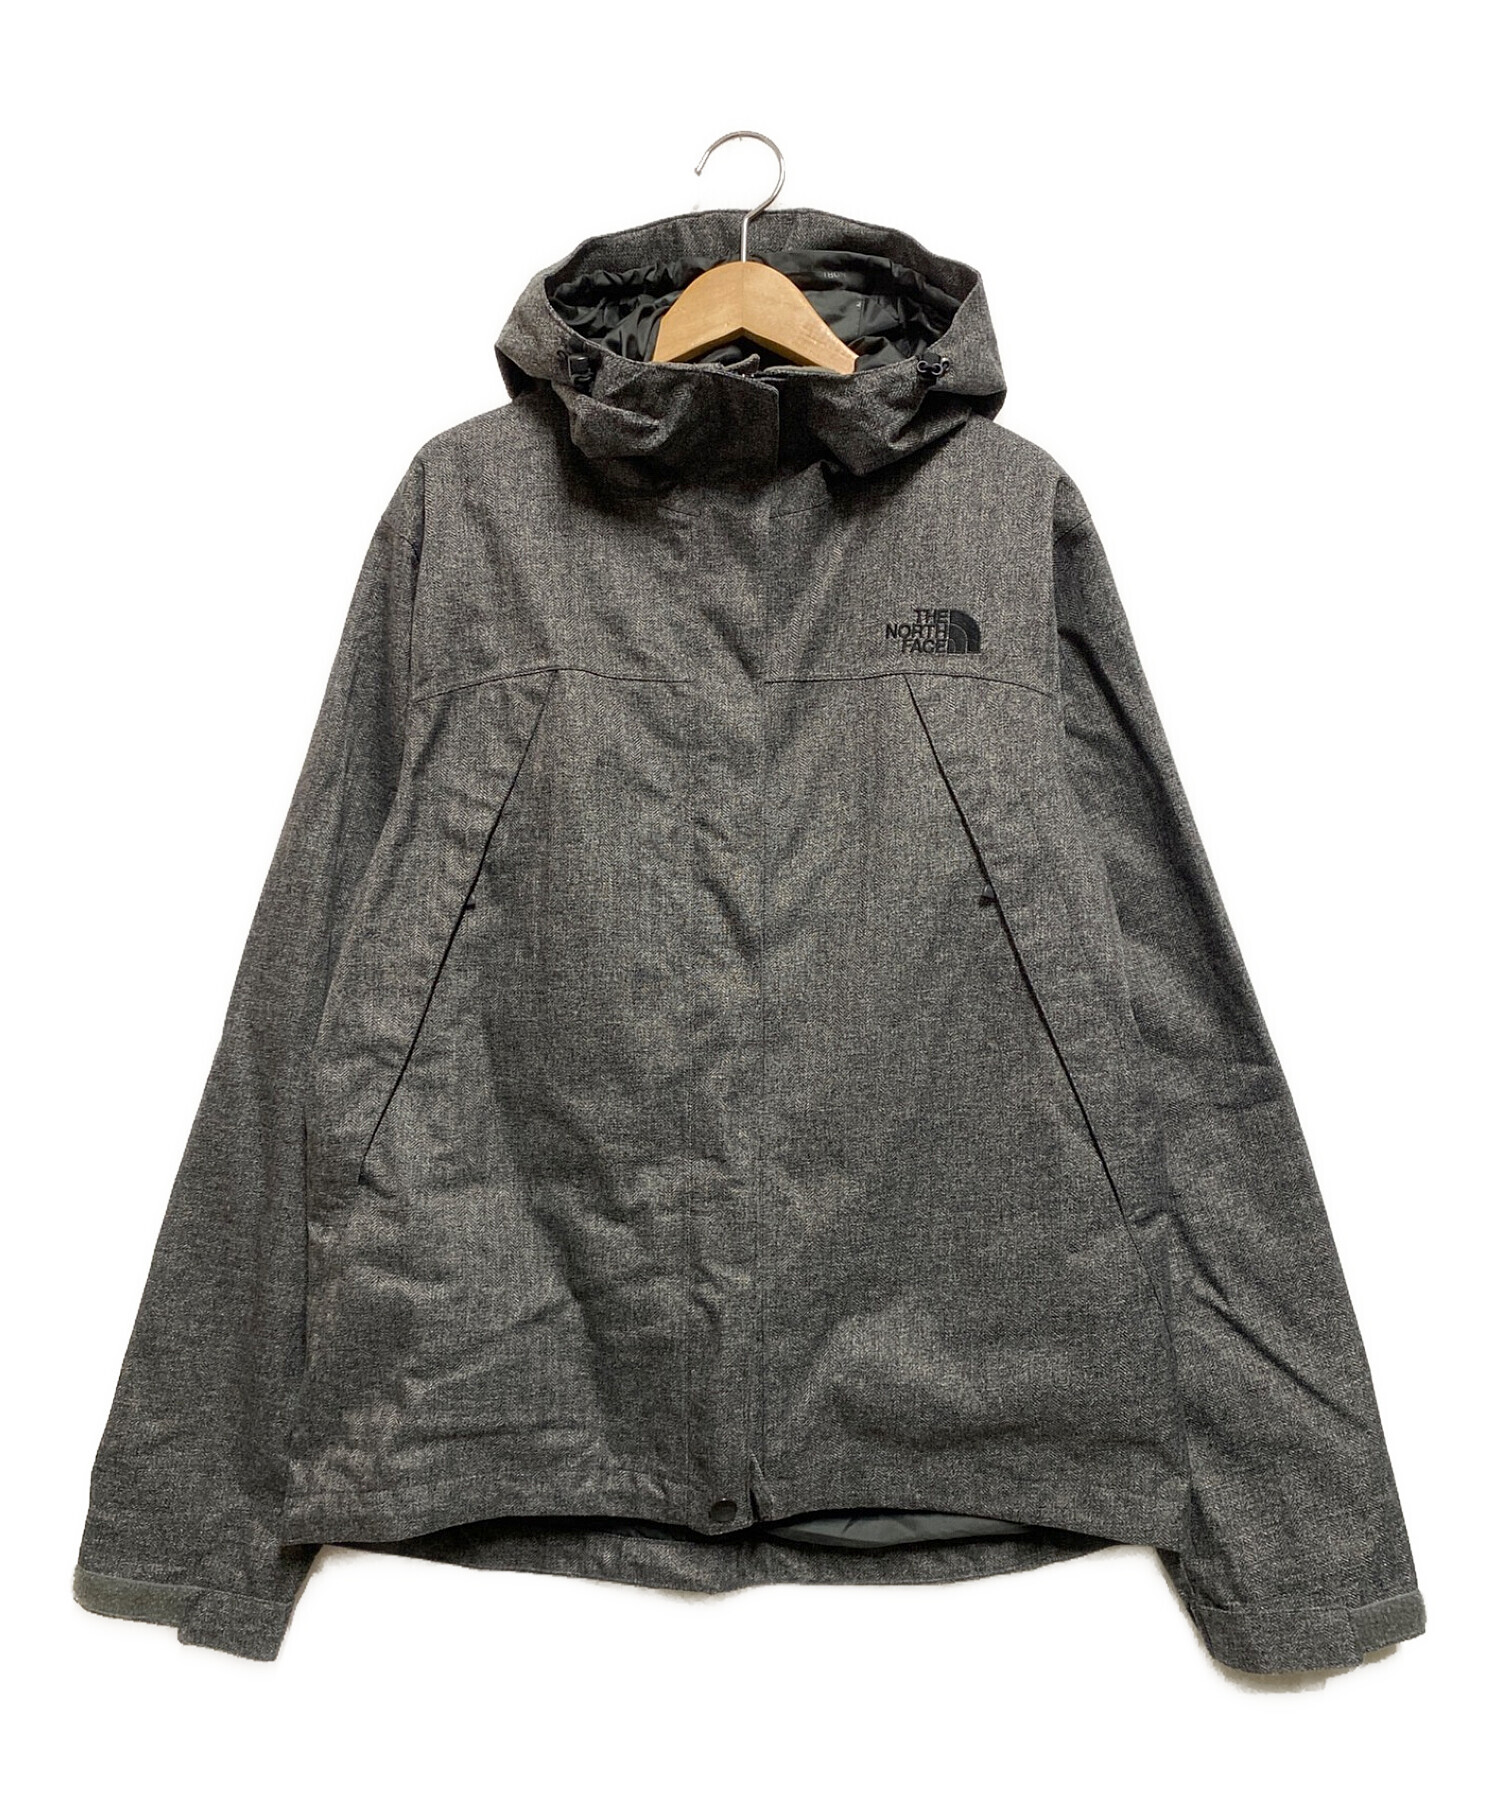 XL☆THE NORTH FACE☆Novelty Scoop Jacket-